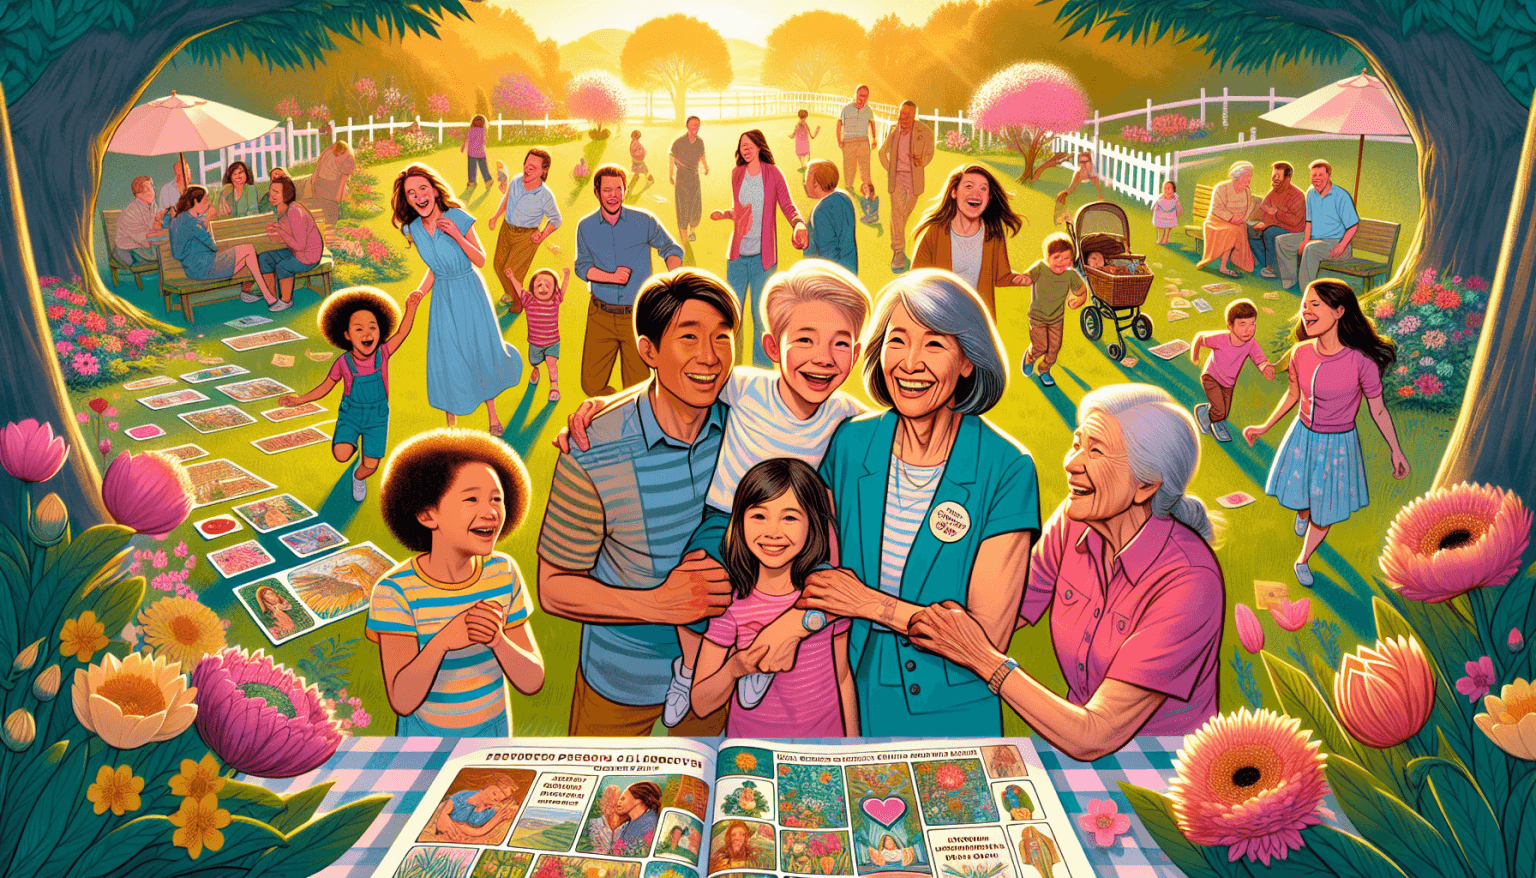 An illustration of a multicultural Christian family engaging in playful activities in a picturesque park, celebrating Mother's Day. In the scene, children and adults are depicted participating in a Ch